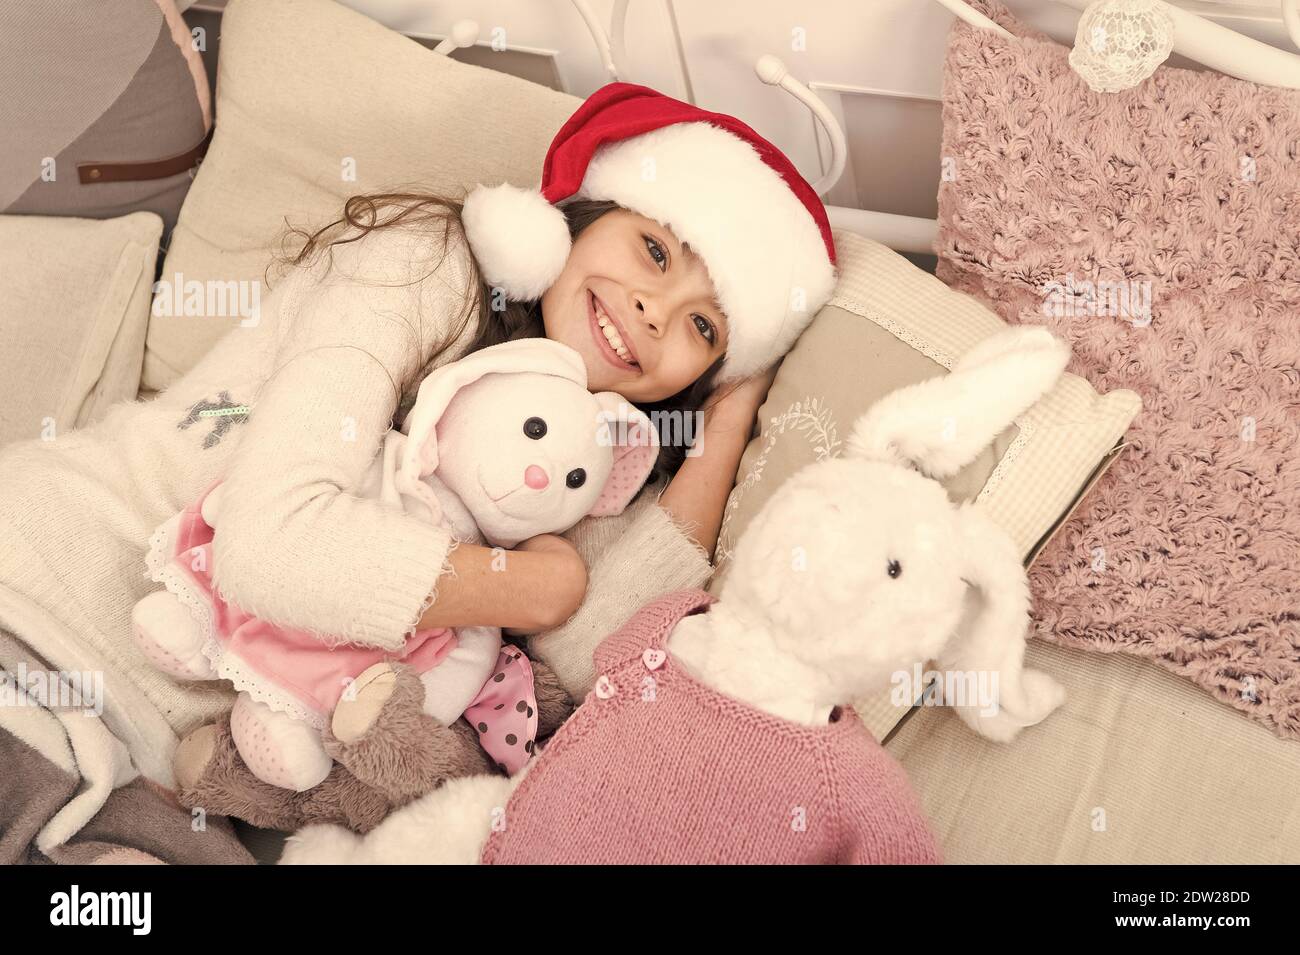 Drifting off to sleep. Sleepy baby in bed. Tired child cuddle toys in bed. Bedtime routine. Got ready for bed. Christmas eve good night. Rest warm and cosy in your bed. Sleep well. Stock Photo